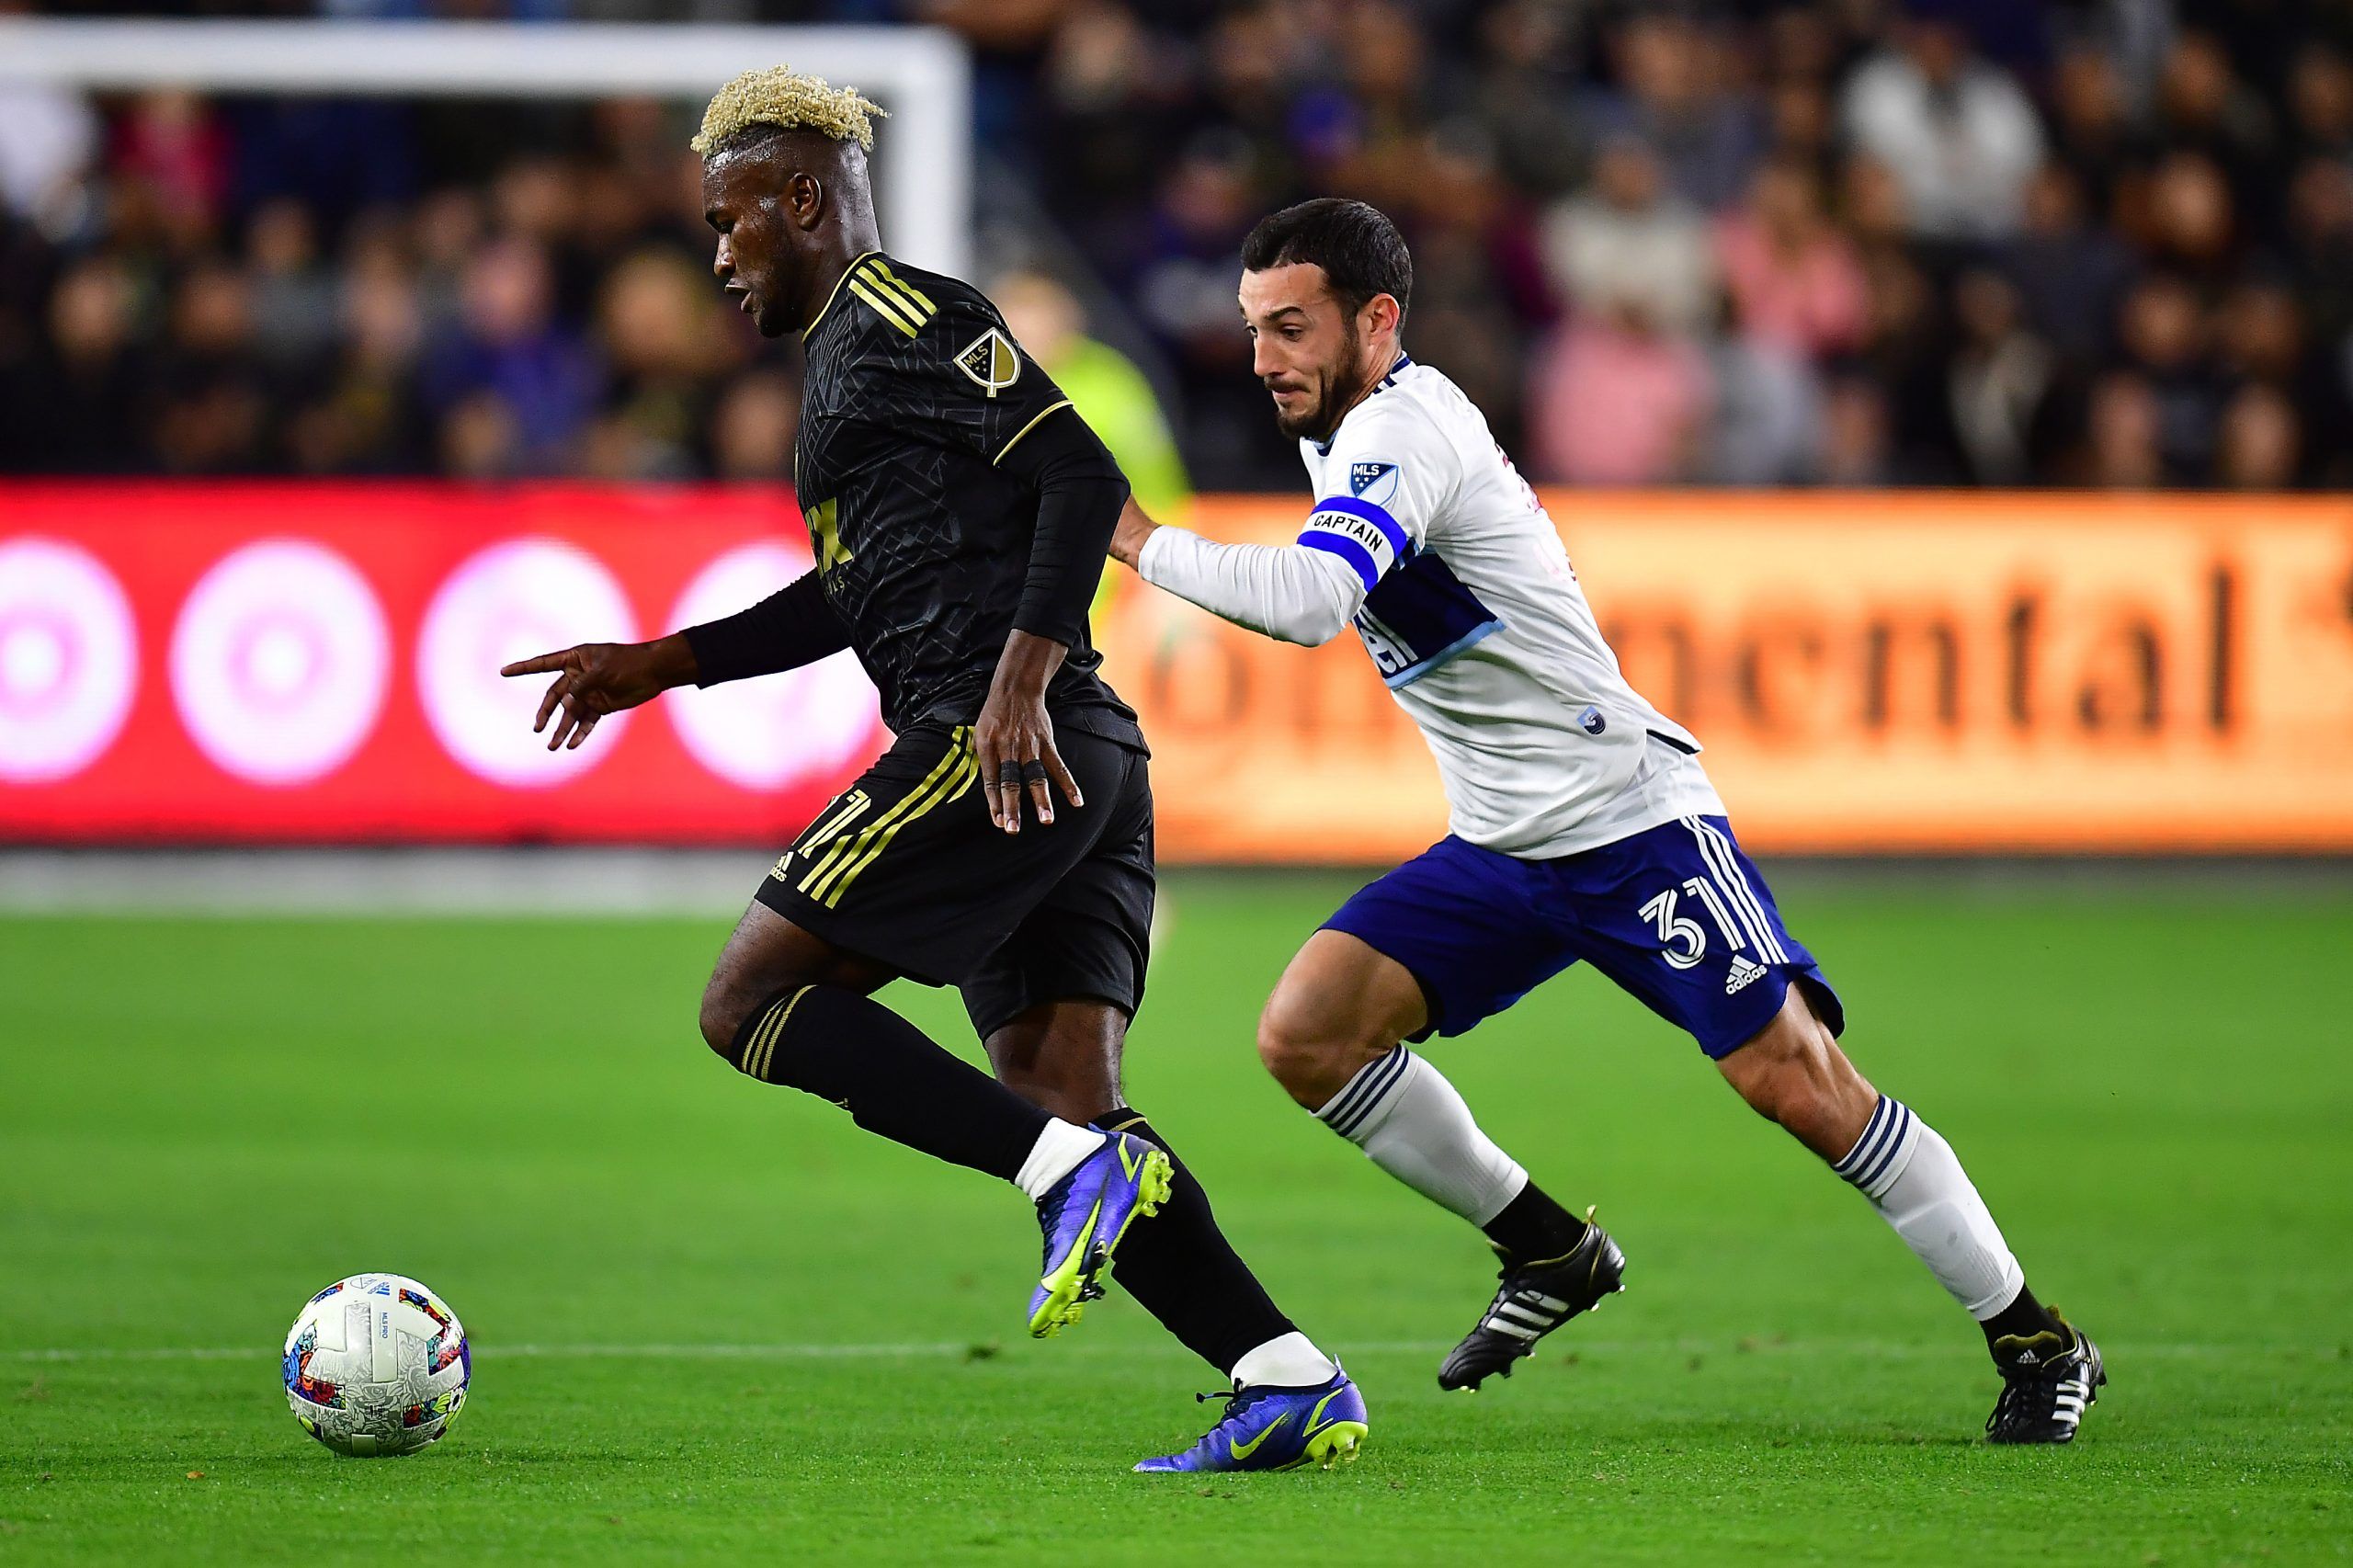 Mar 20, 2022; Los Angeles, California, USA; Los Angeles FC midfielder José Cifuentes (11) moves the ball ahead of Vancouver Whitecaps midfielder Russell Teibert (31) during the first half at Banc of California Stadium. Mandatory Credit: Gary A. Vasquez-USA TODAY Sports